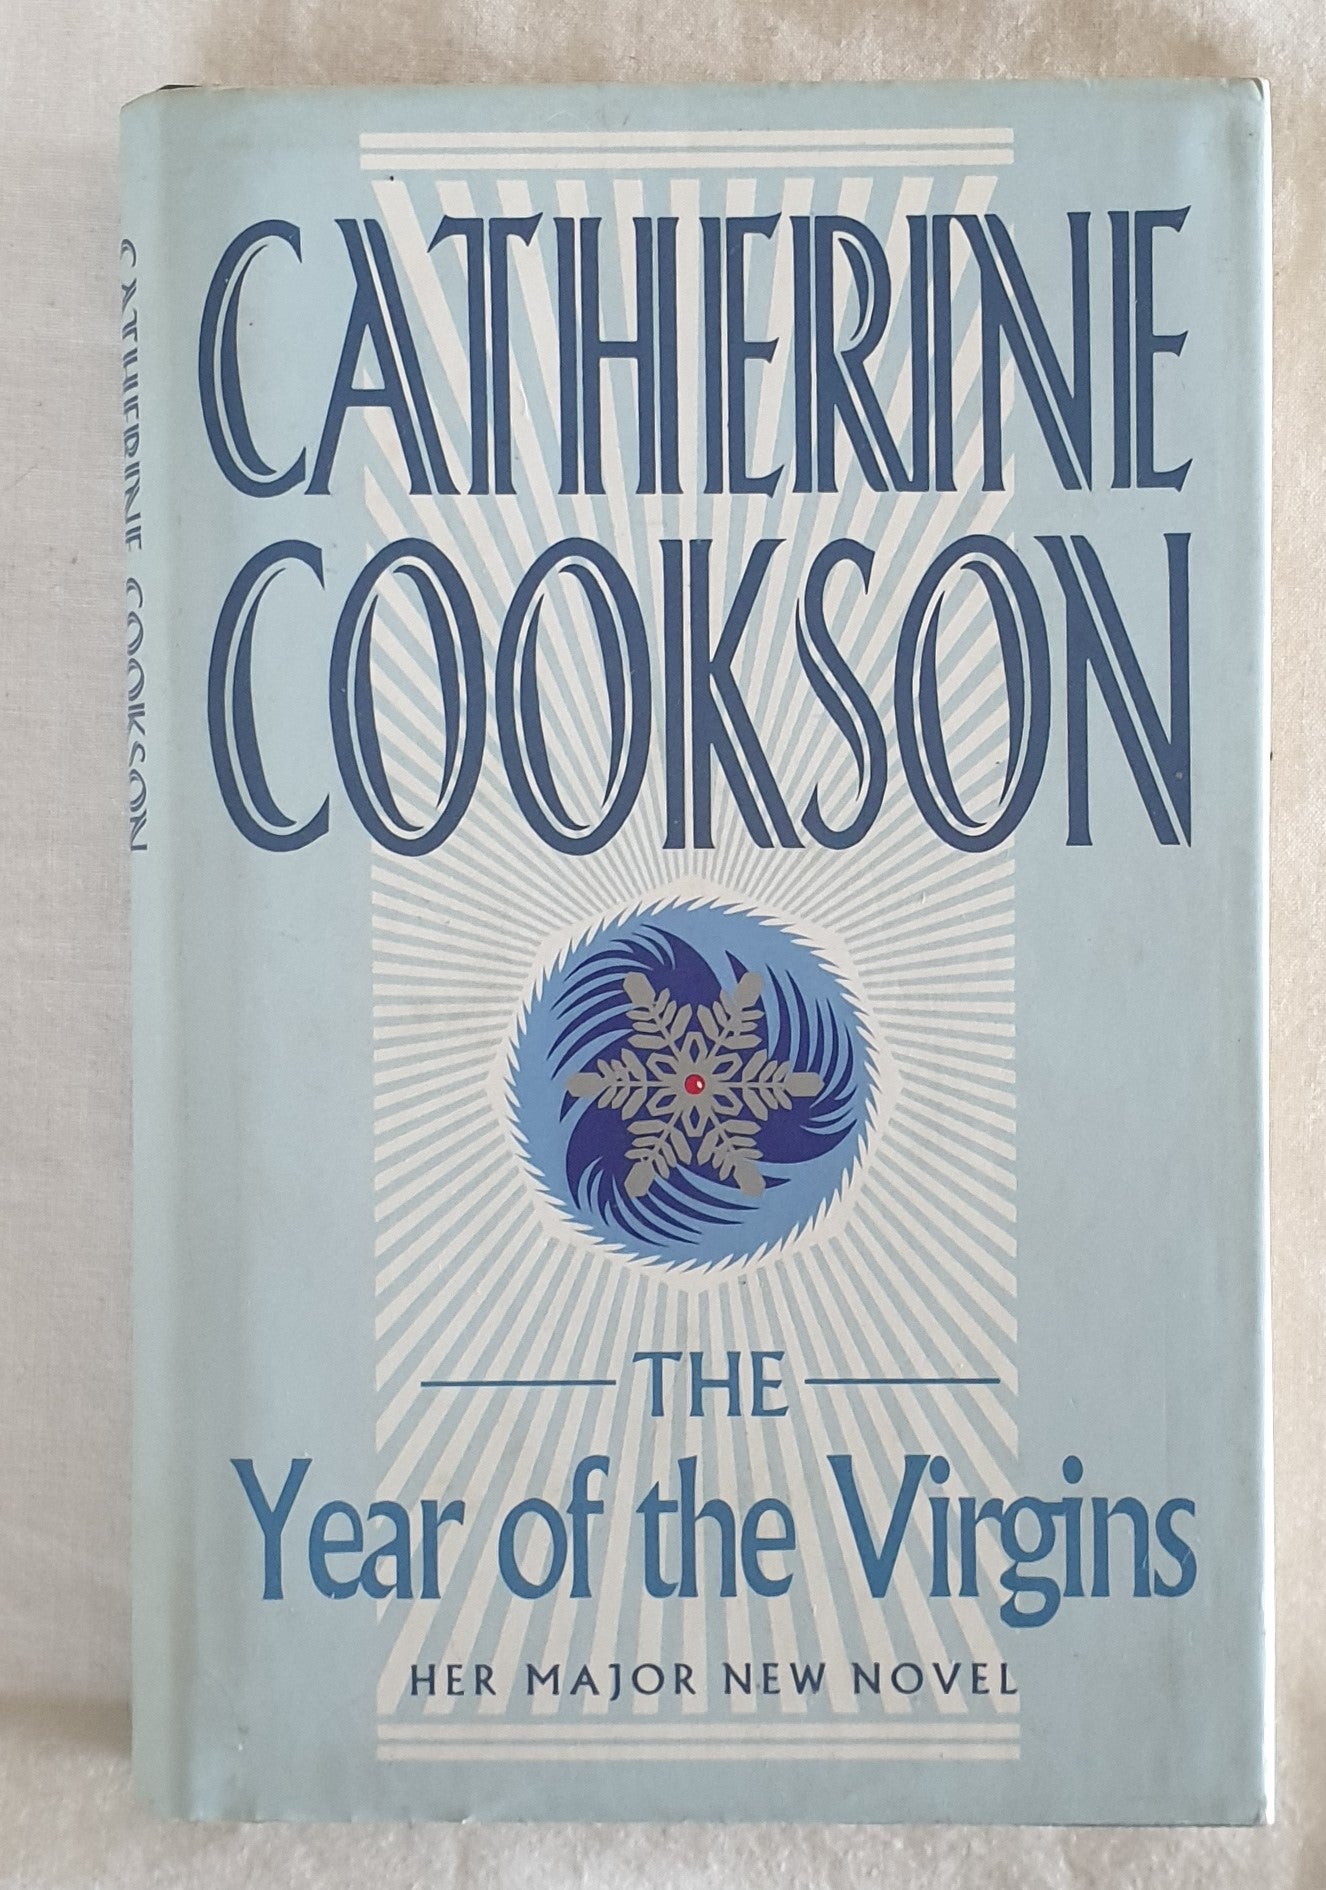 The Year of the Virgins by Catherine Cookson